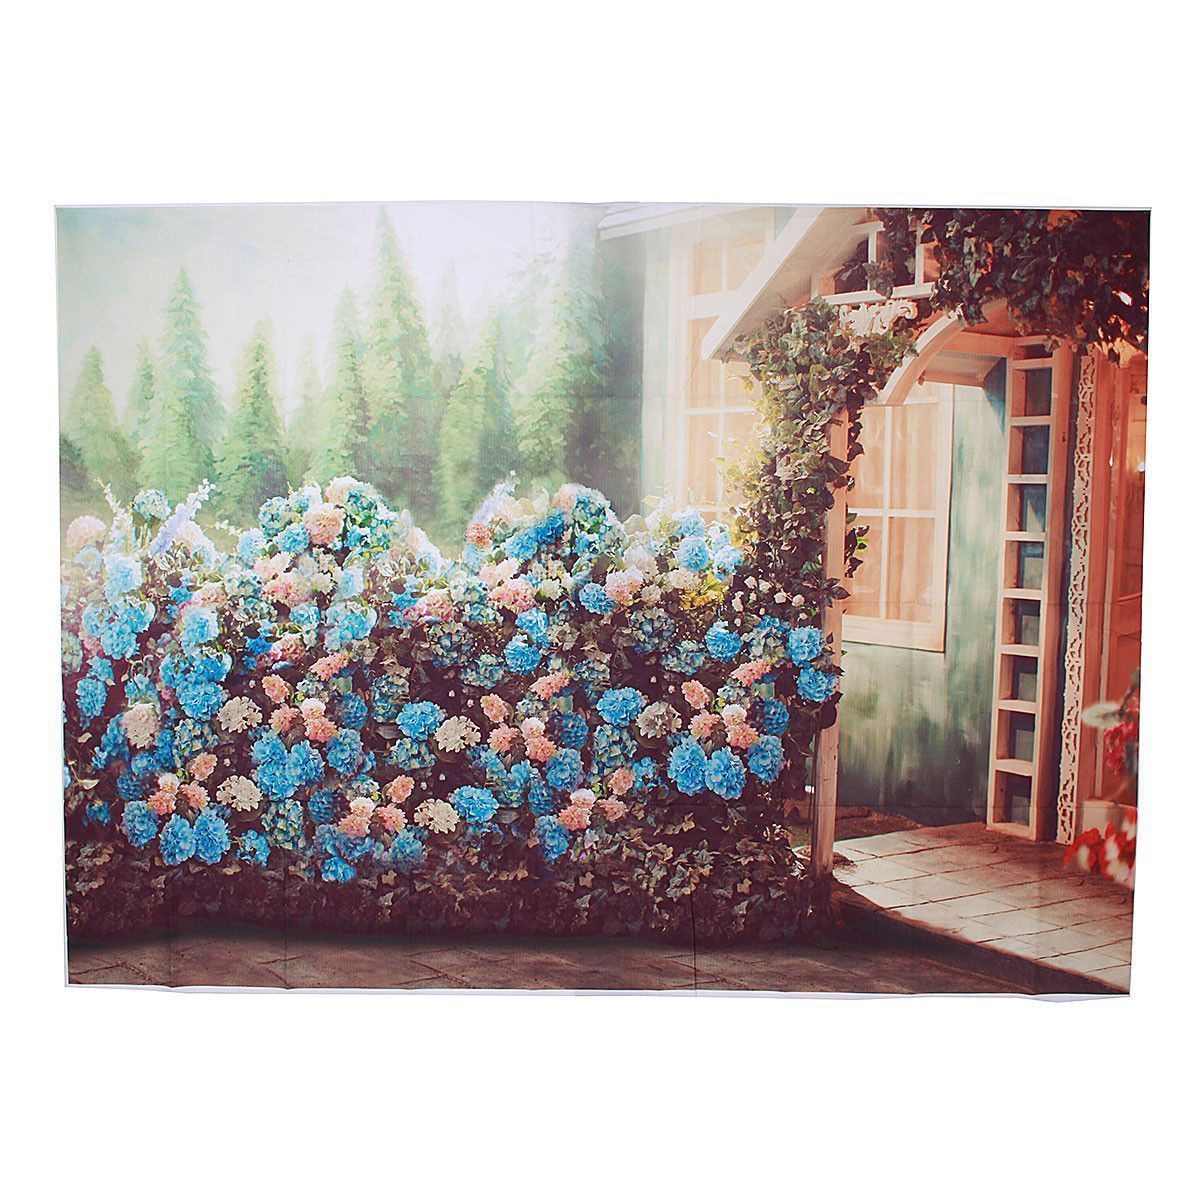 5x7FT-Cabin-Flower-Fence-Photography-Backdrop-Background-Studio-Prop-1385736